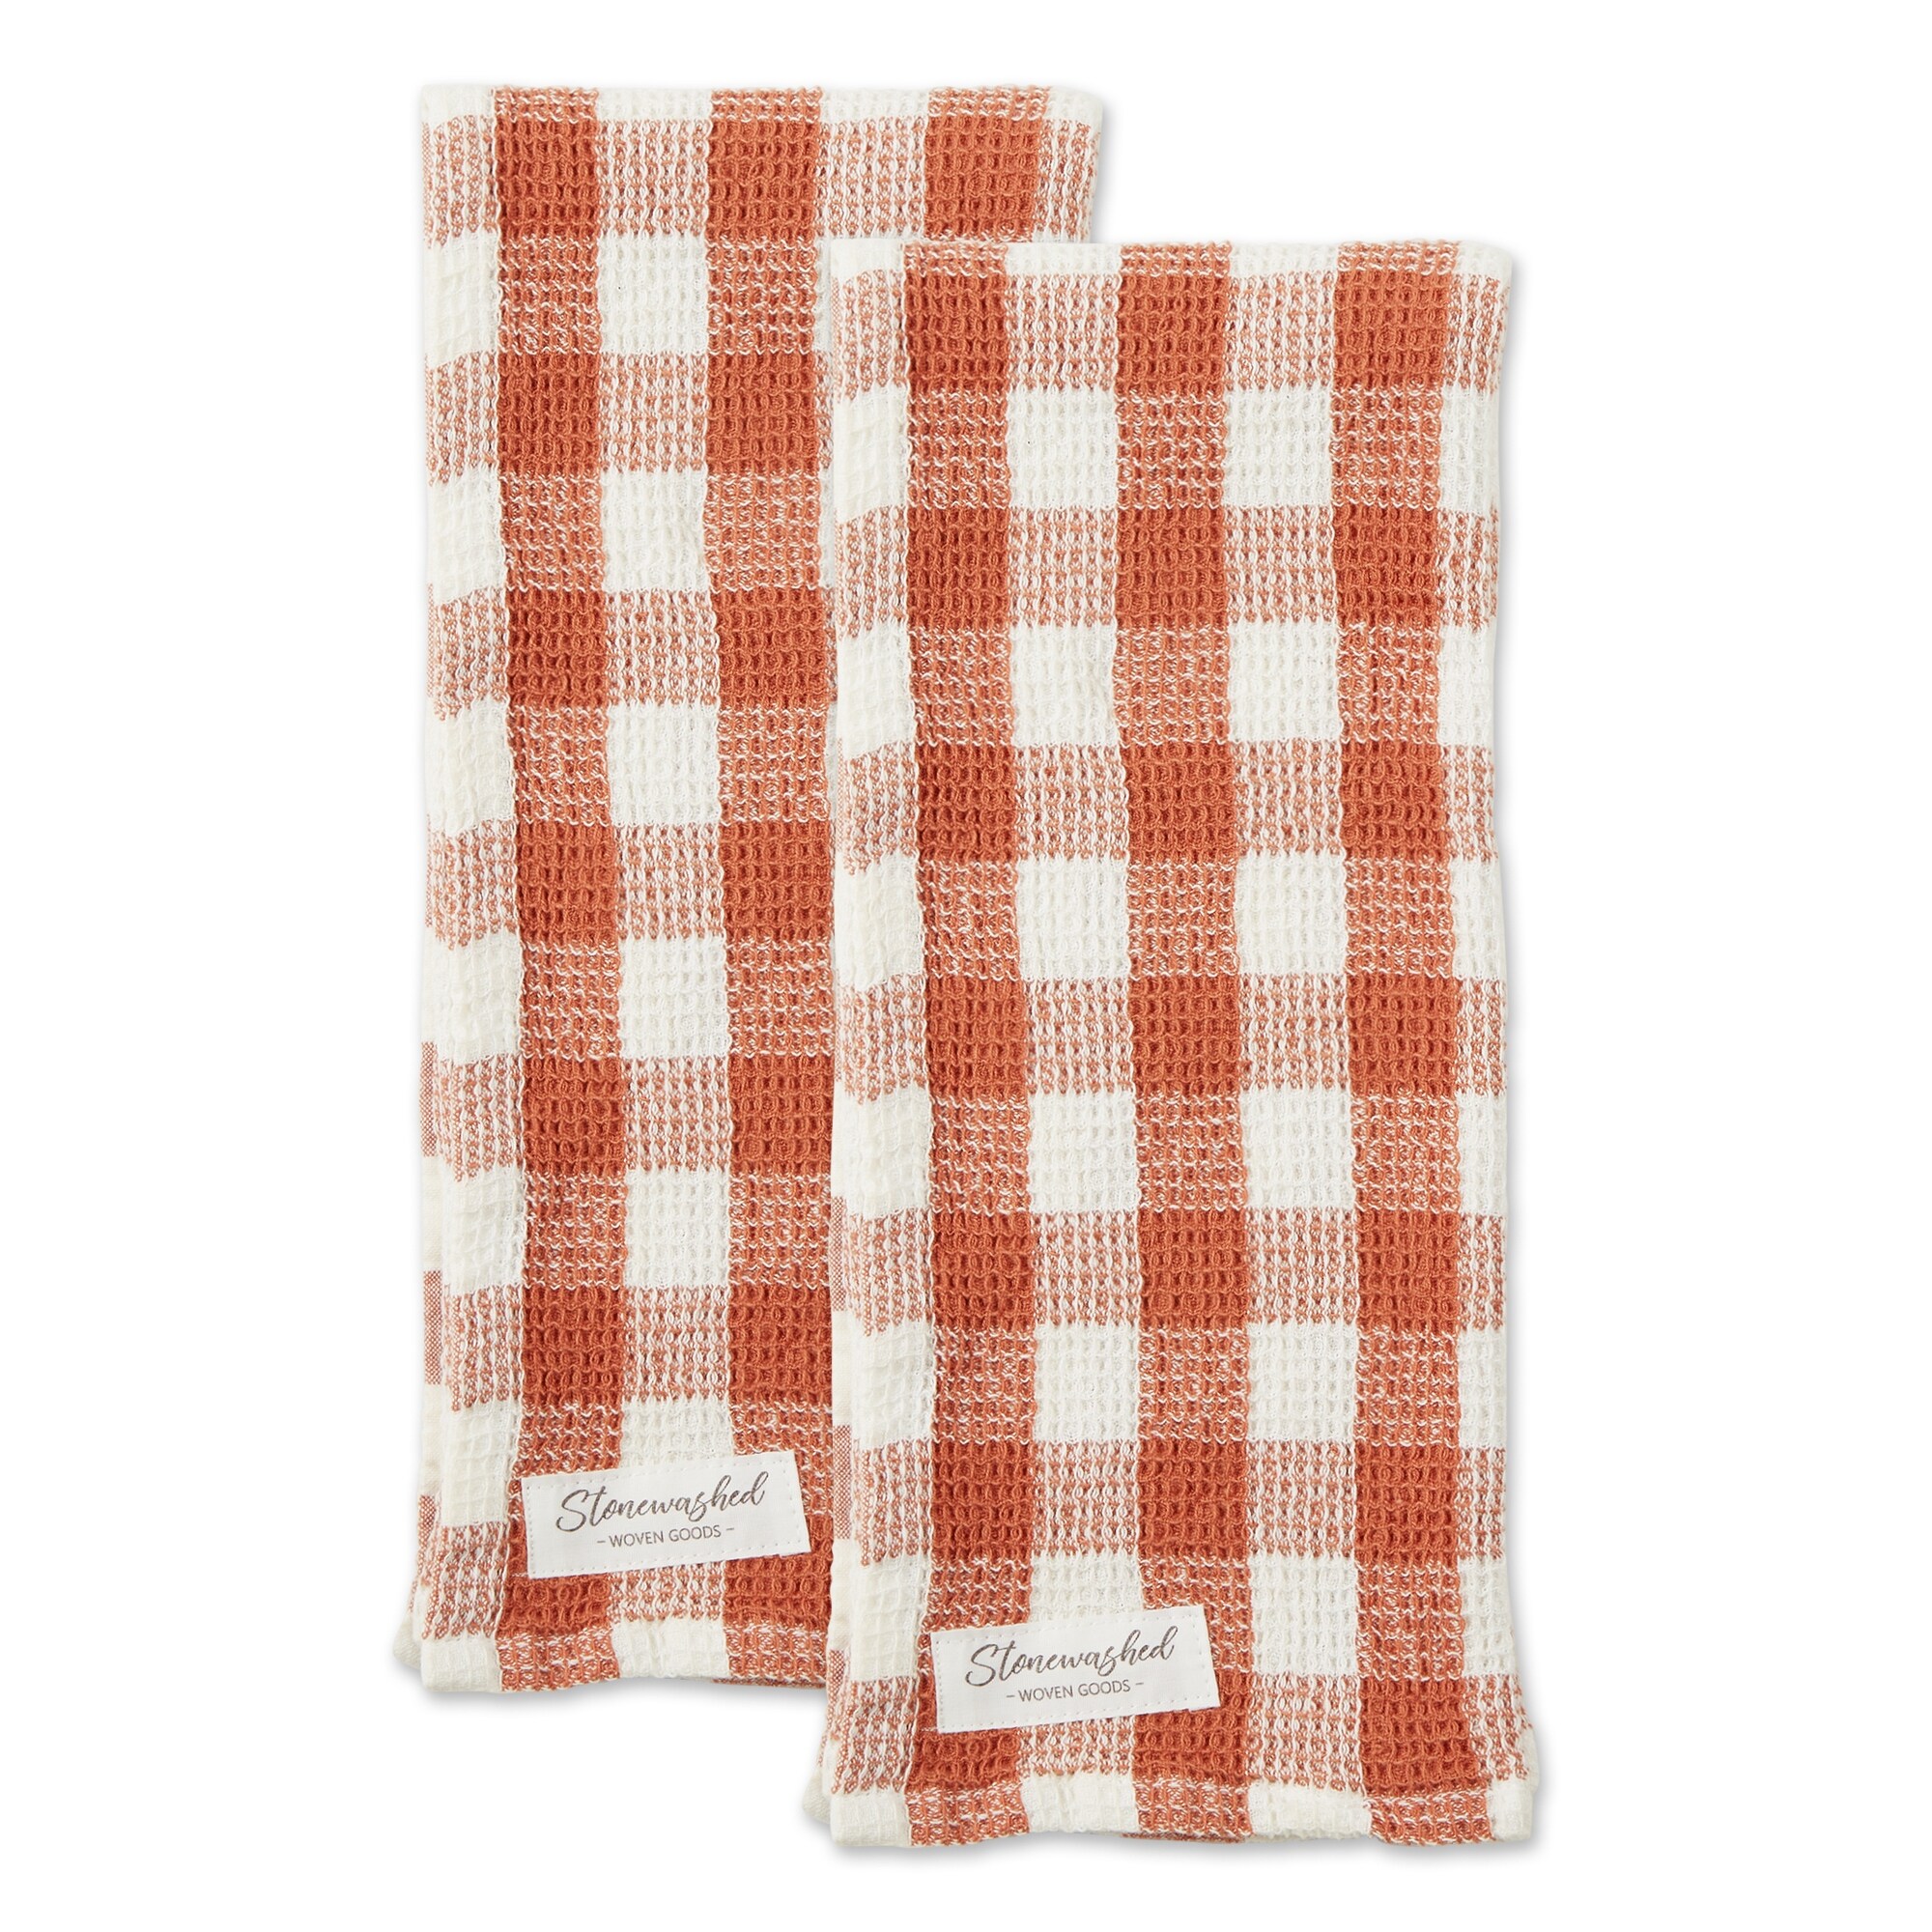 https://ak1.ostkcdn.com/images/products/is/images/direct/9102d3425a7fa38ad238d6cb95274156579e51d5/DII-Washed-Waffle-Woven-Dishtowel-Set-of-2.jpg